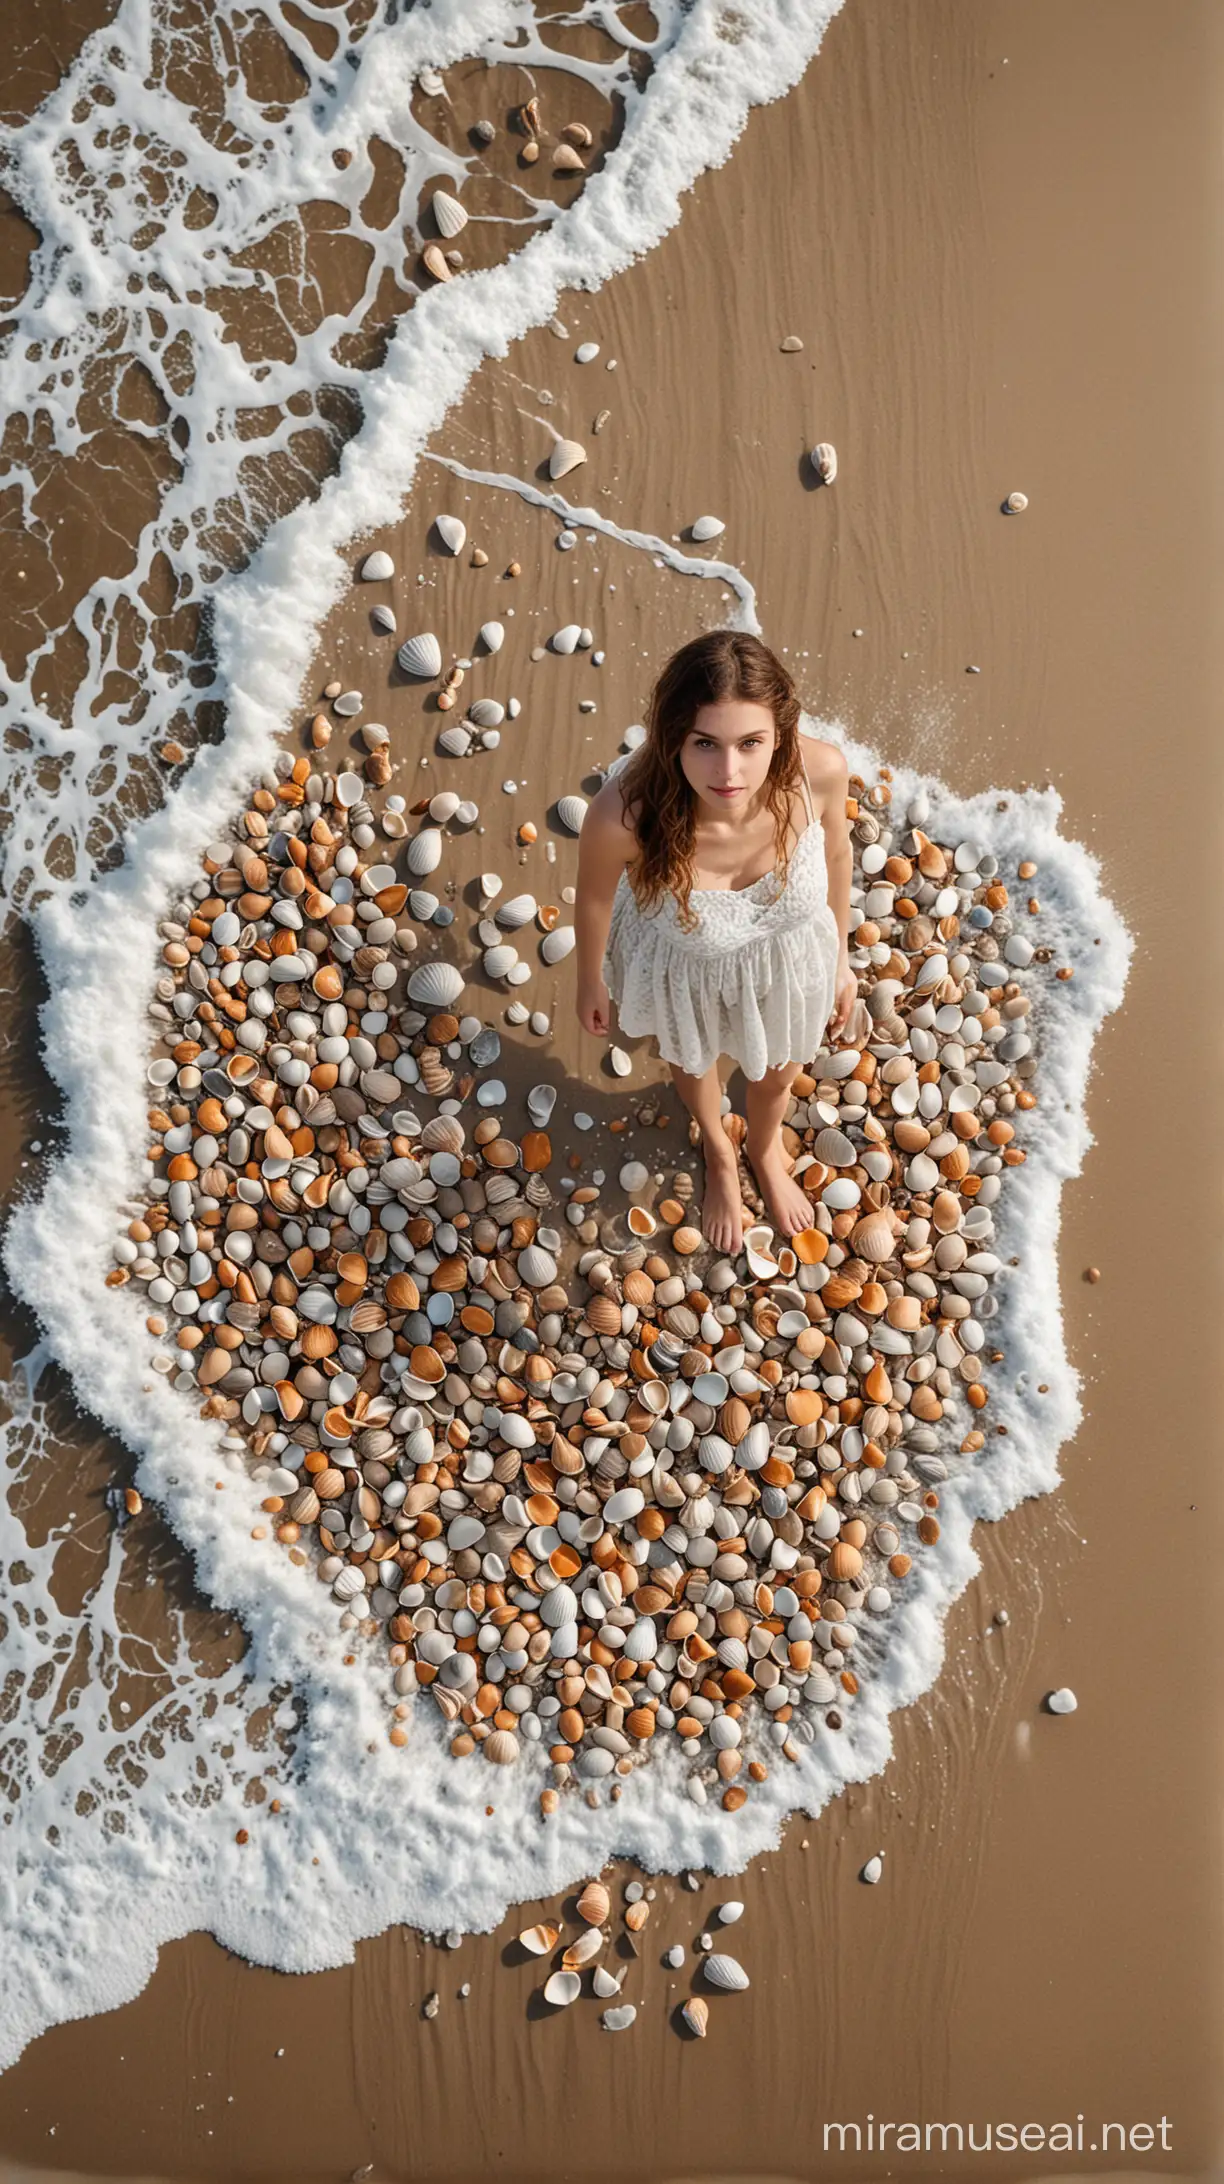 A full-length portrait of a beautiful girl in a chic dress made of sea waves, standing on a sandy seashore strewn with shells. View from above. The photo was taken with a Nikon D850 camera and a portrait lens